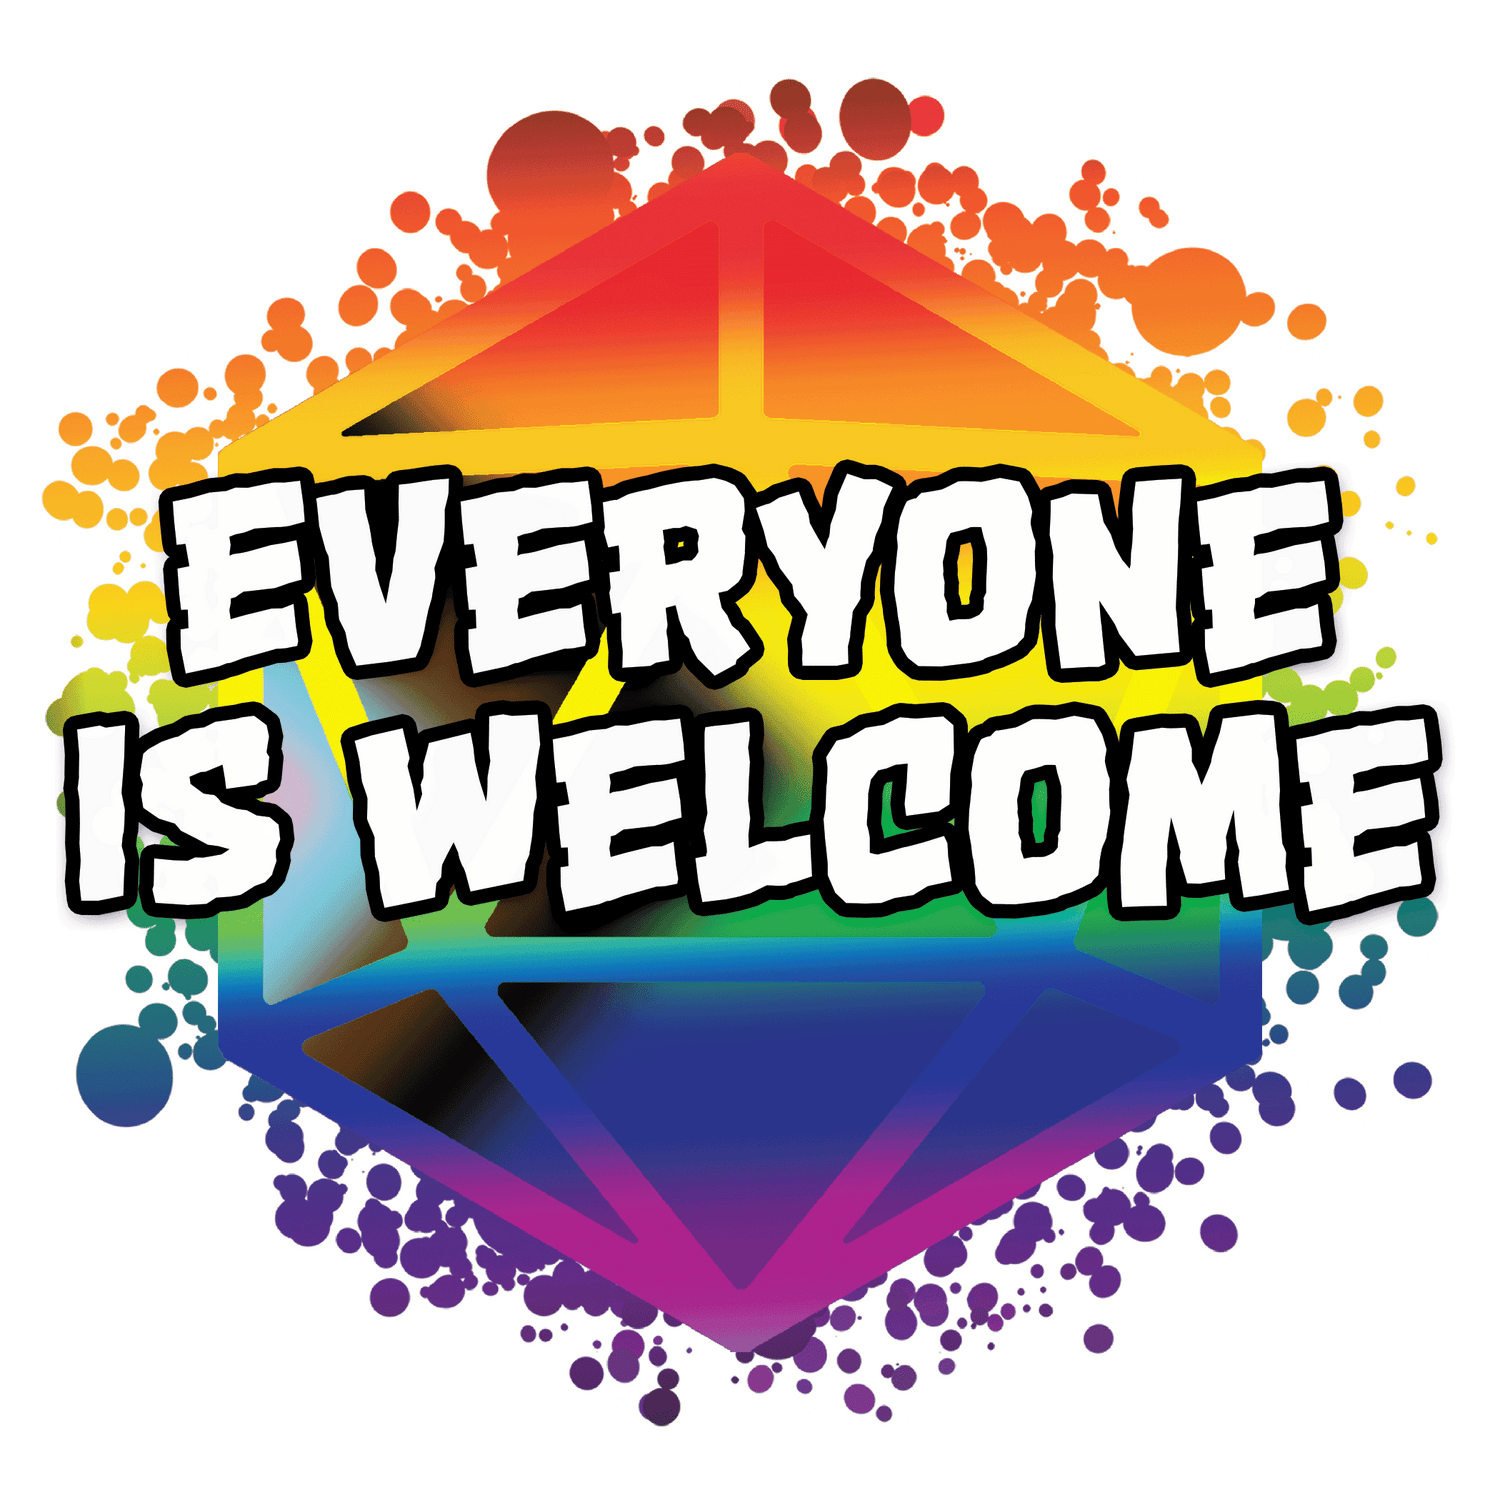 "Everyone is Welcome" text over Dice-Shaped Logo with Pride Rainbow coloring and comic-book style Kirby Krackle